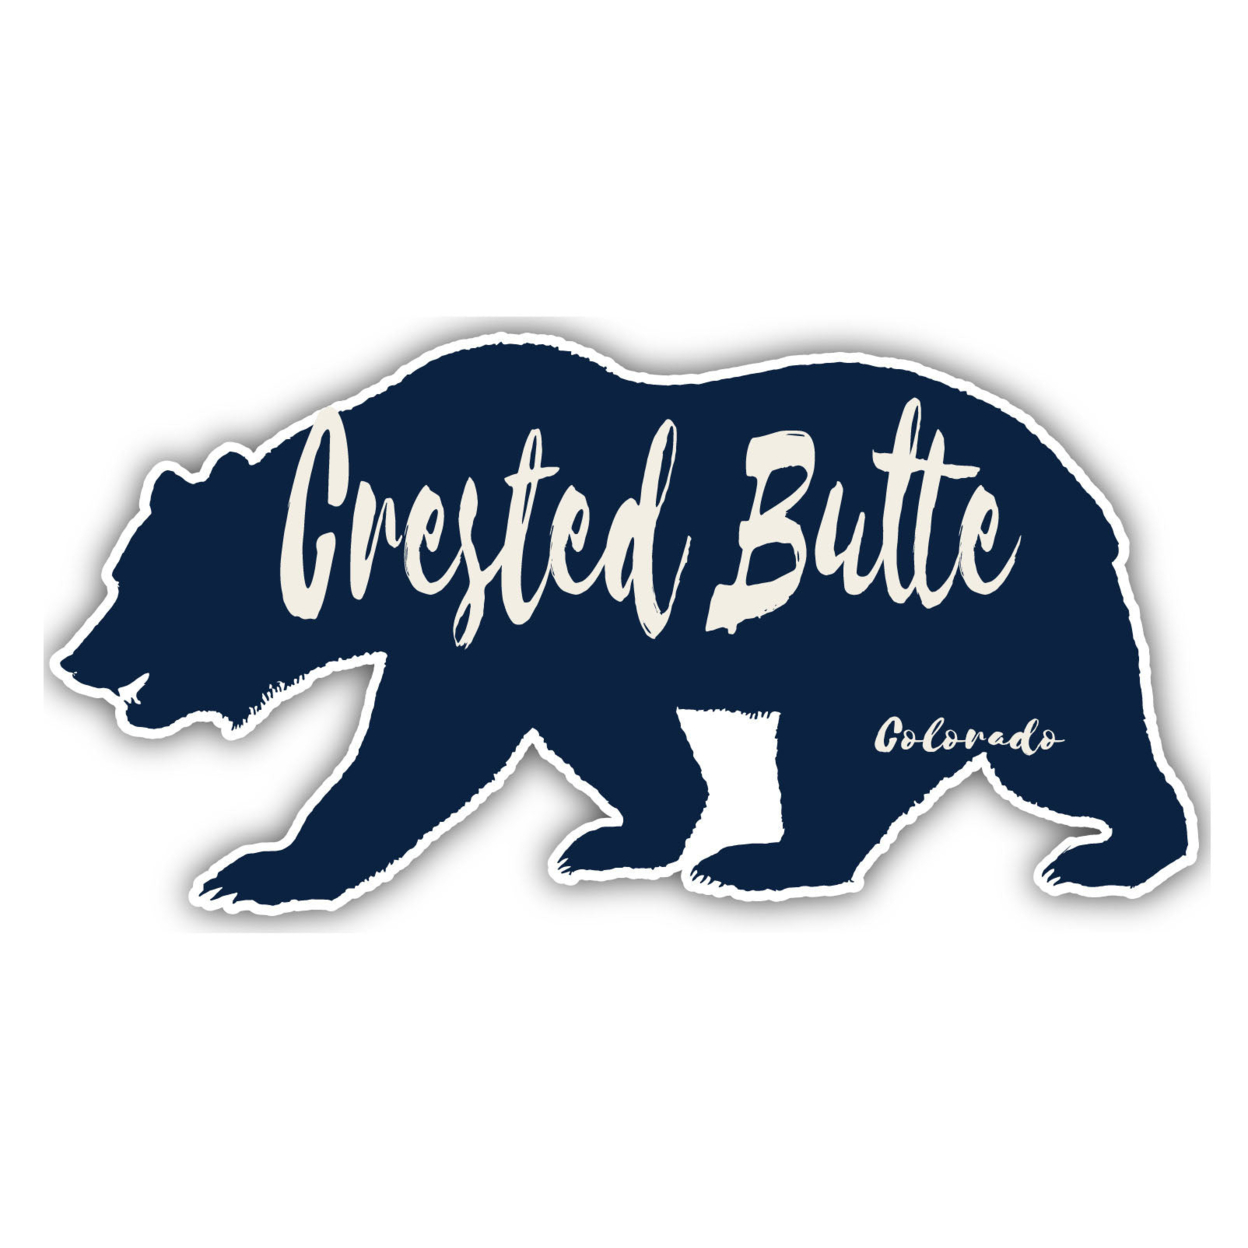 Crested Butte Colorado Souvenir Decorative Stickers (Choose Theme And Size) - 4-Pack, 12-Inch, Bear